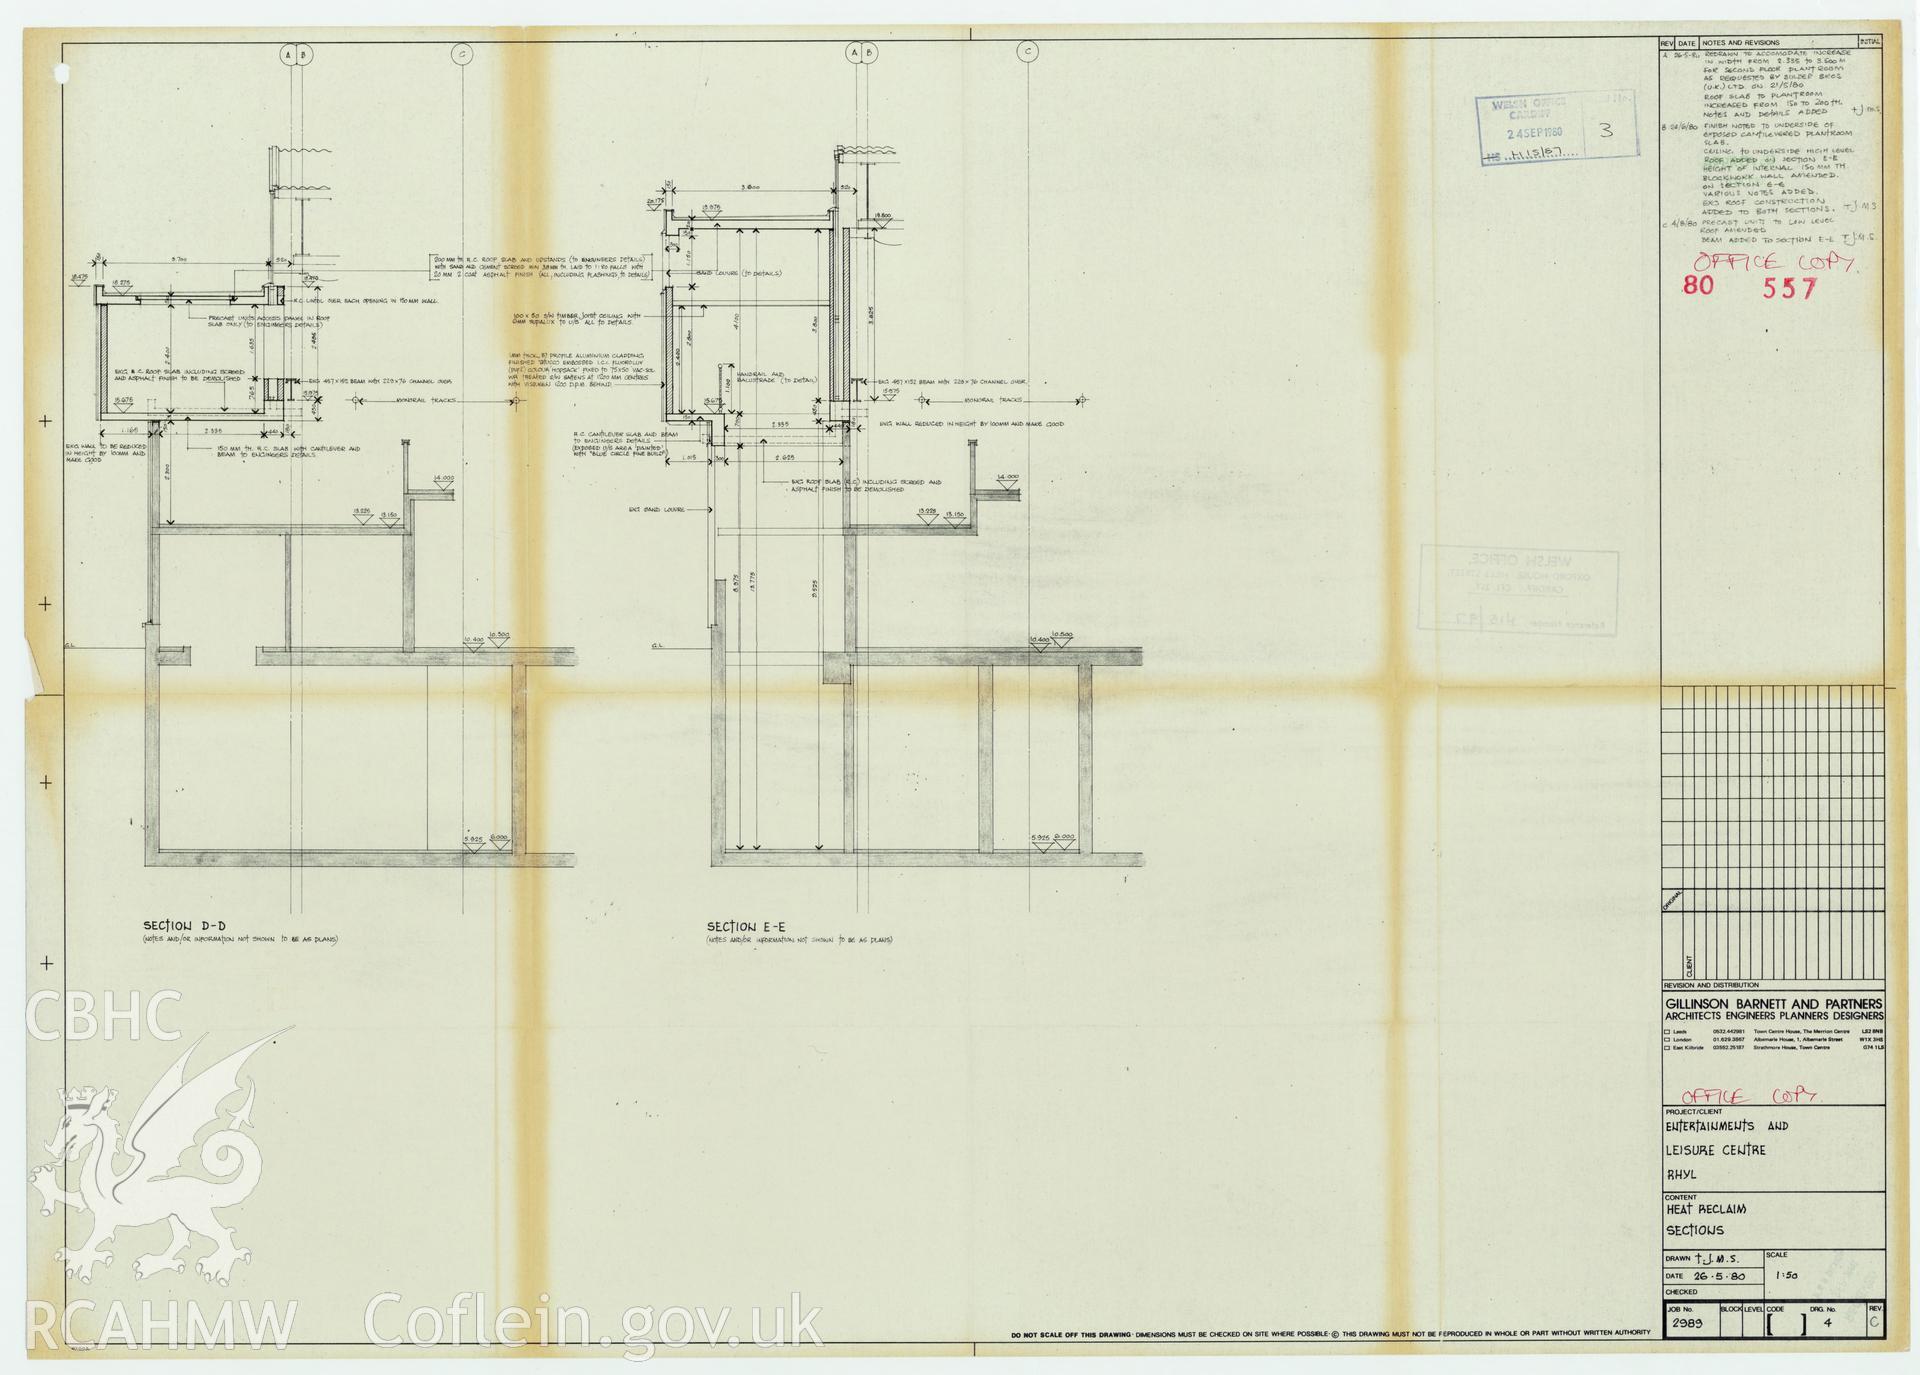 Digital copy of a measured drawing showing heat reclamation sections of the entertainment complex at Rhyl Sun Centre and Theatre, produced by Gillinson Barnett & Partners  1980. Loaned for copying by Denbighshire County Council.